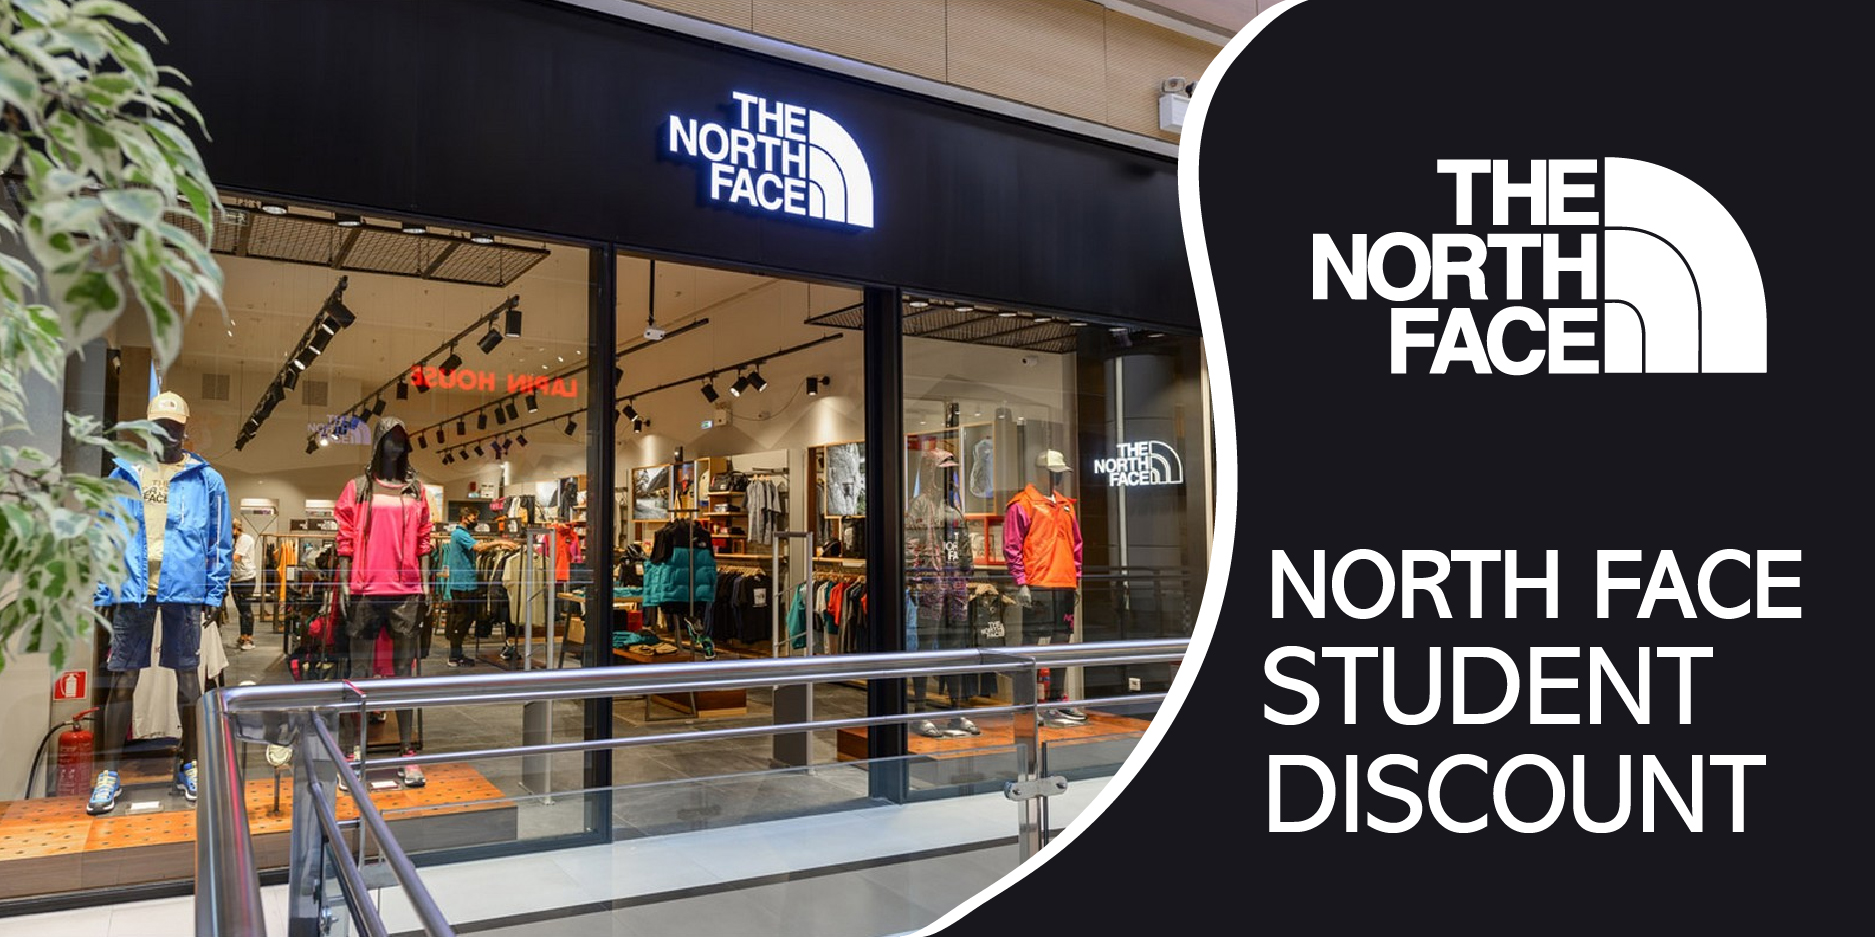 The North Face Student Discount